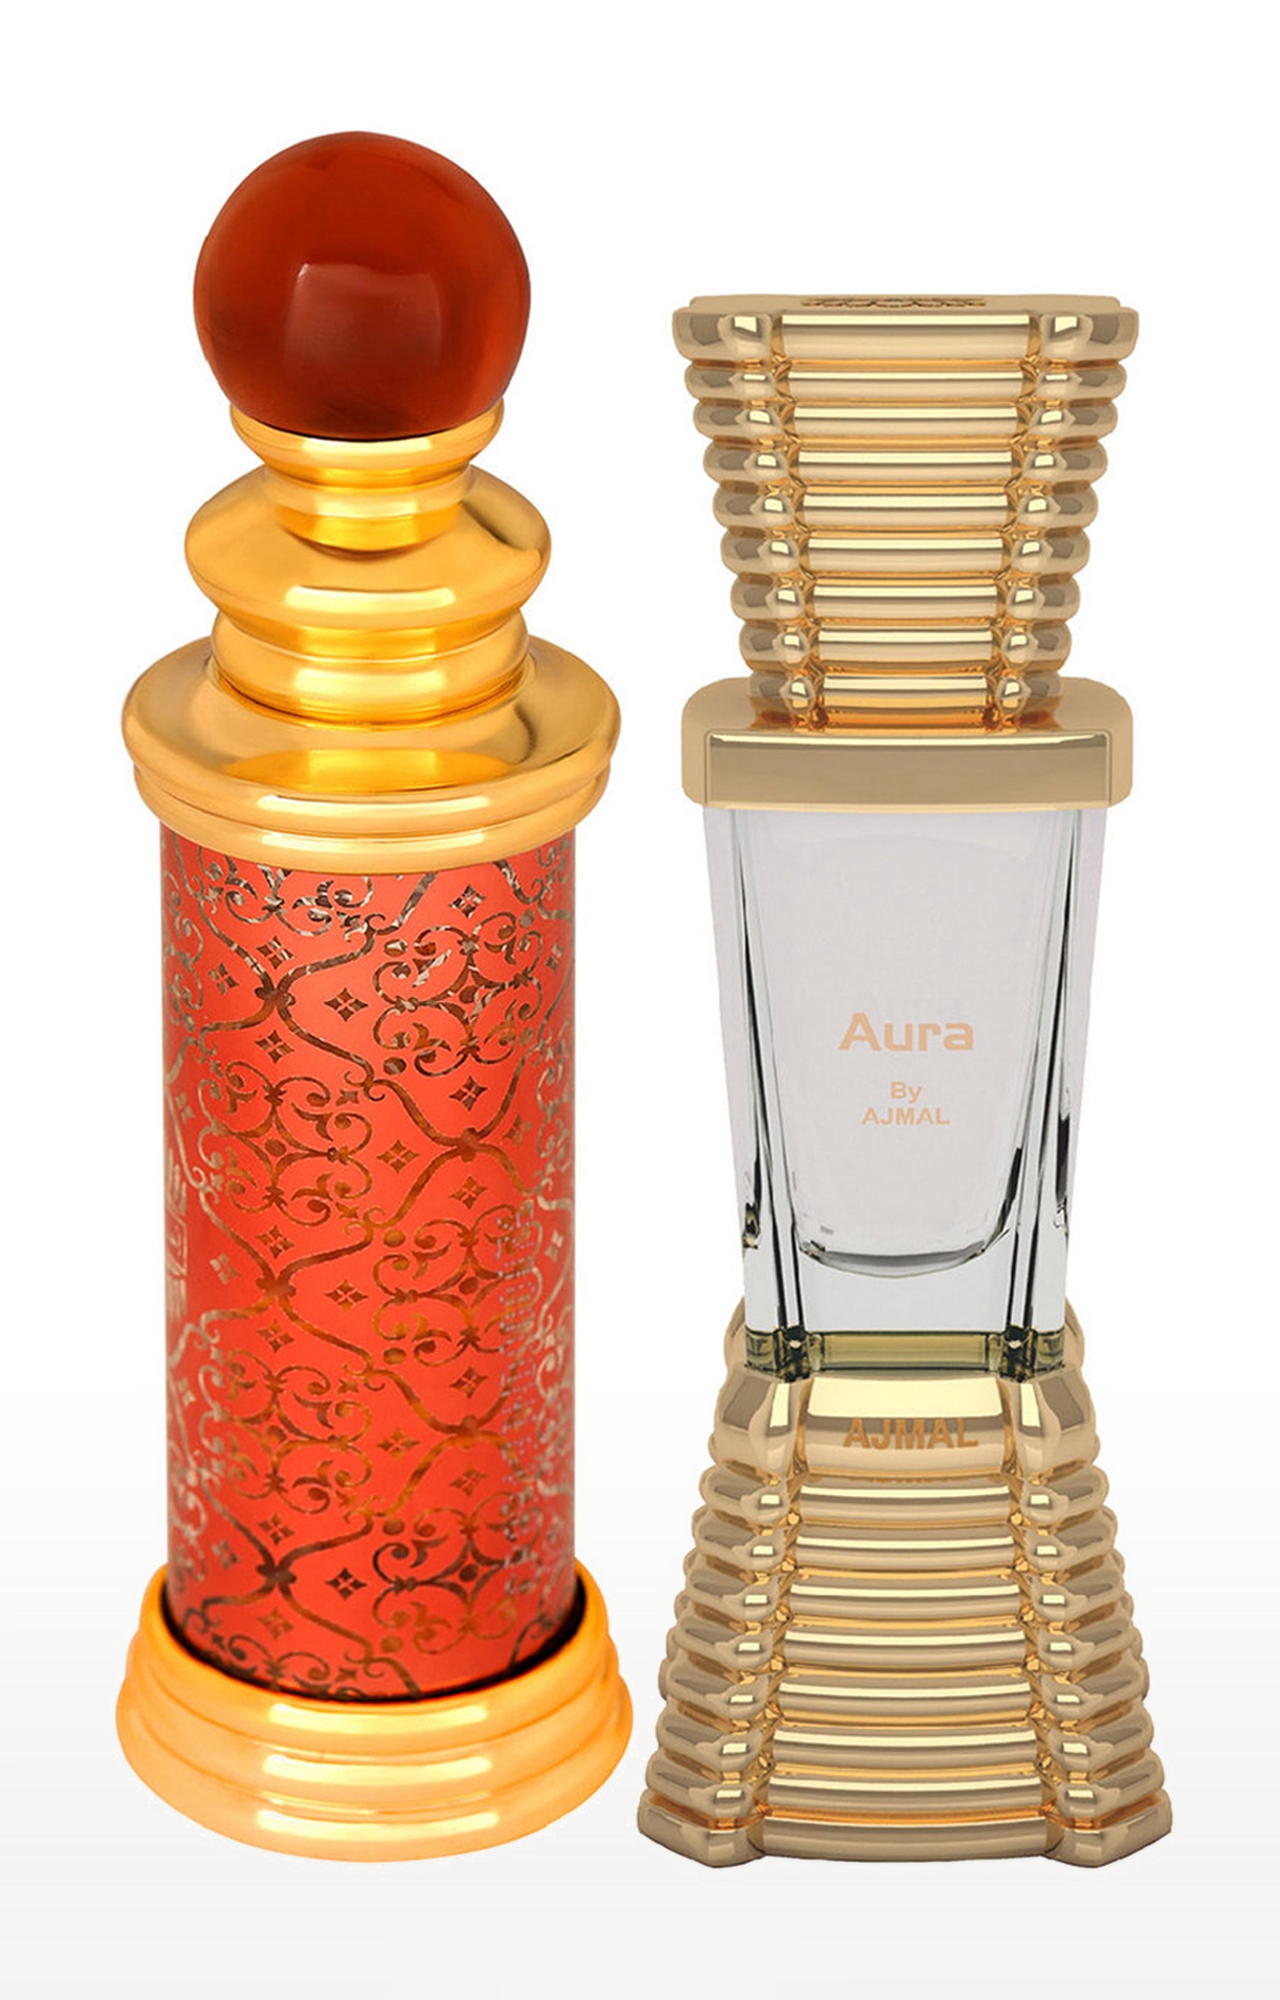 Ajmal | Ajmal Classic Oud Concentrated Perfume Oil Oudh Alcohol-free Attar 10ml for Unisex and Aura Concentrated Perfume Oil Alcohol-free Attar 10ml for Unisex